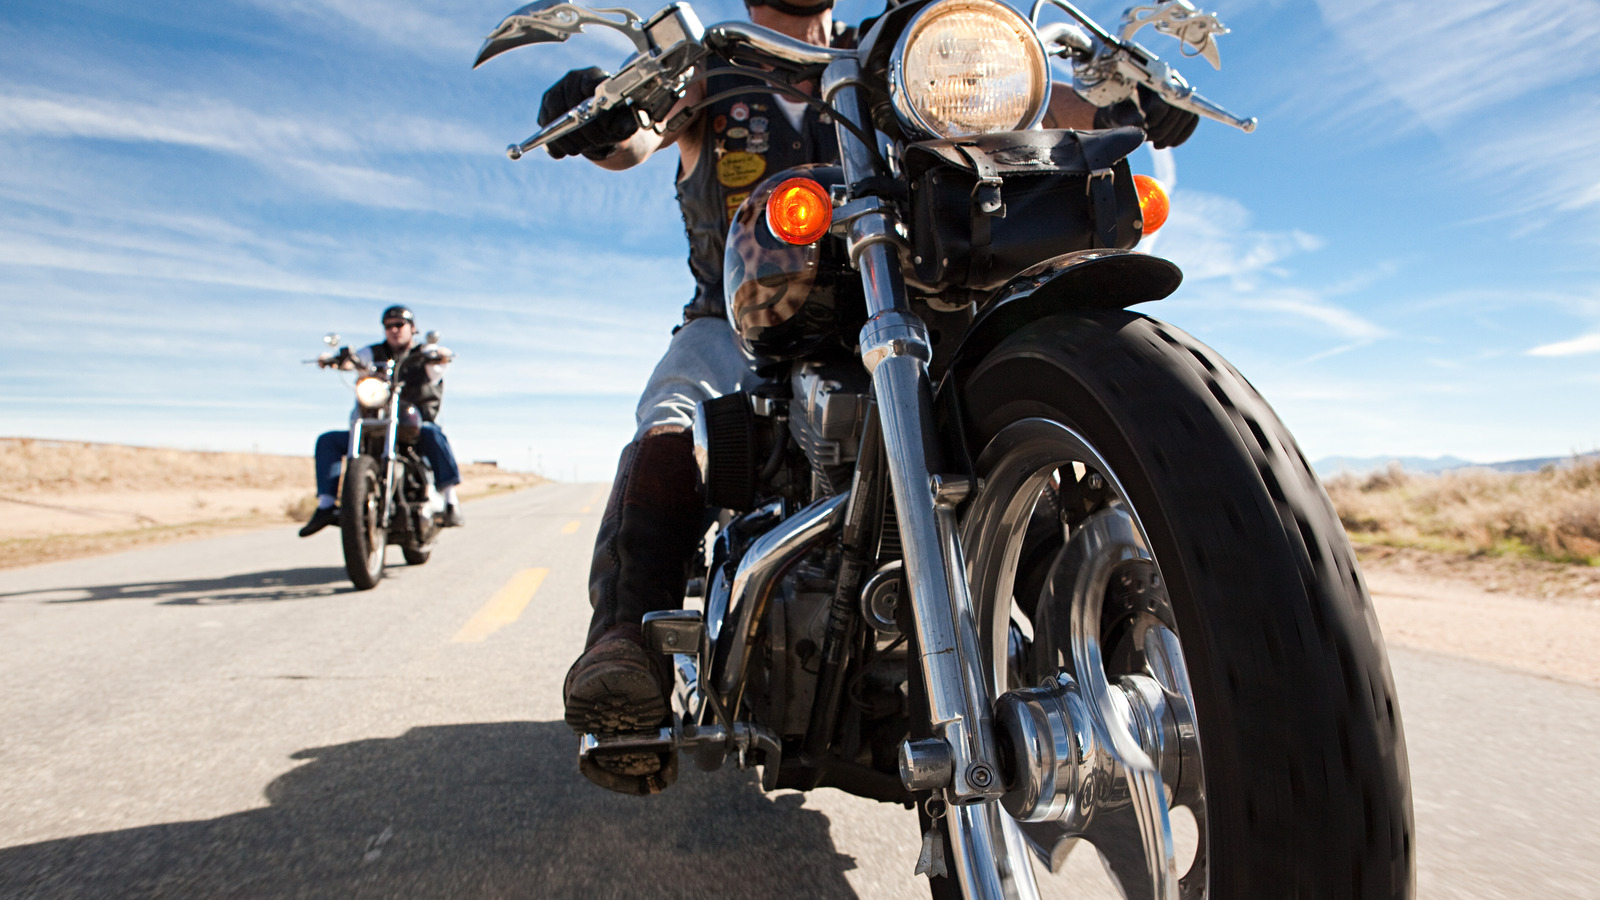 4 Tips To Help Keep Your Motorcycle Engine Cool In Hot Weather